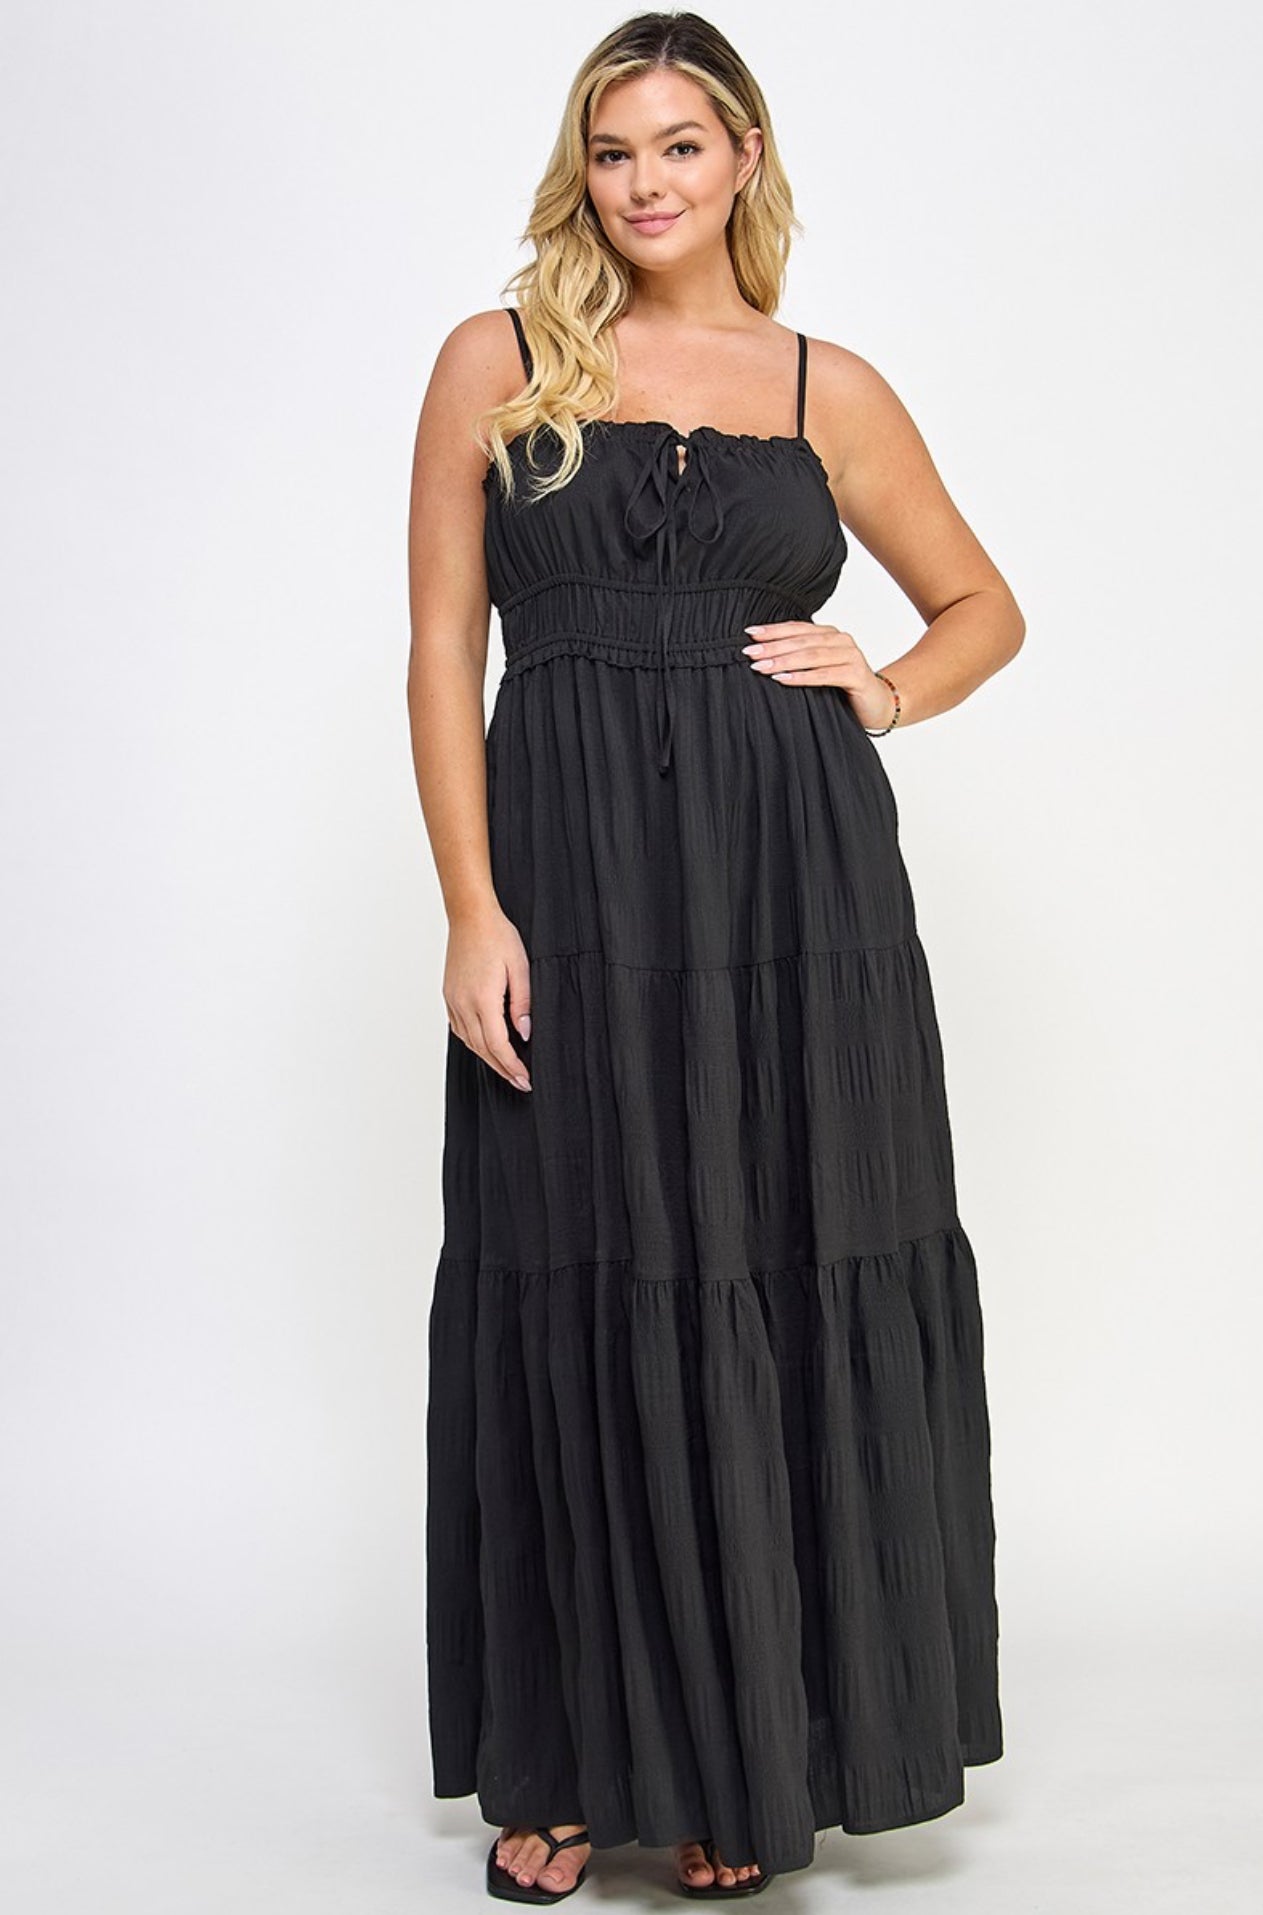 “Cup Of Sunshine” Maxi Dress (small-3x)